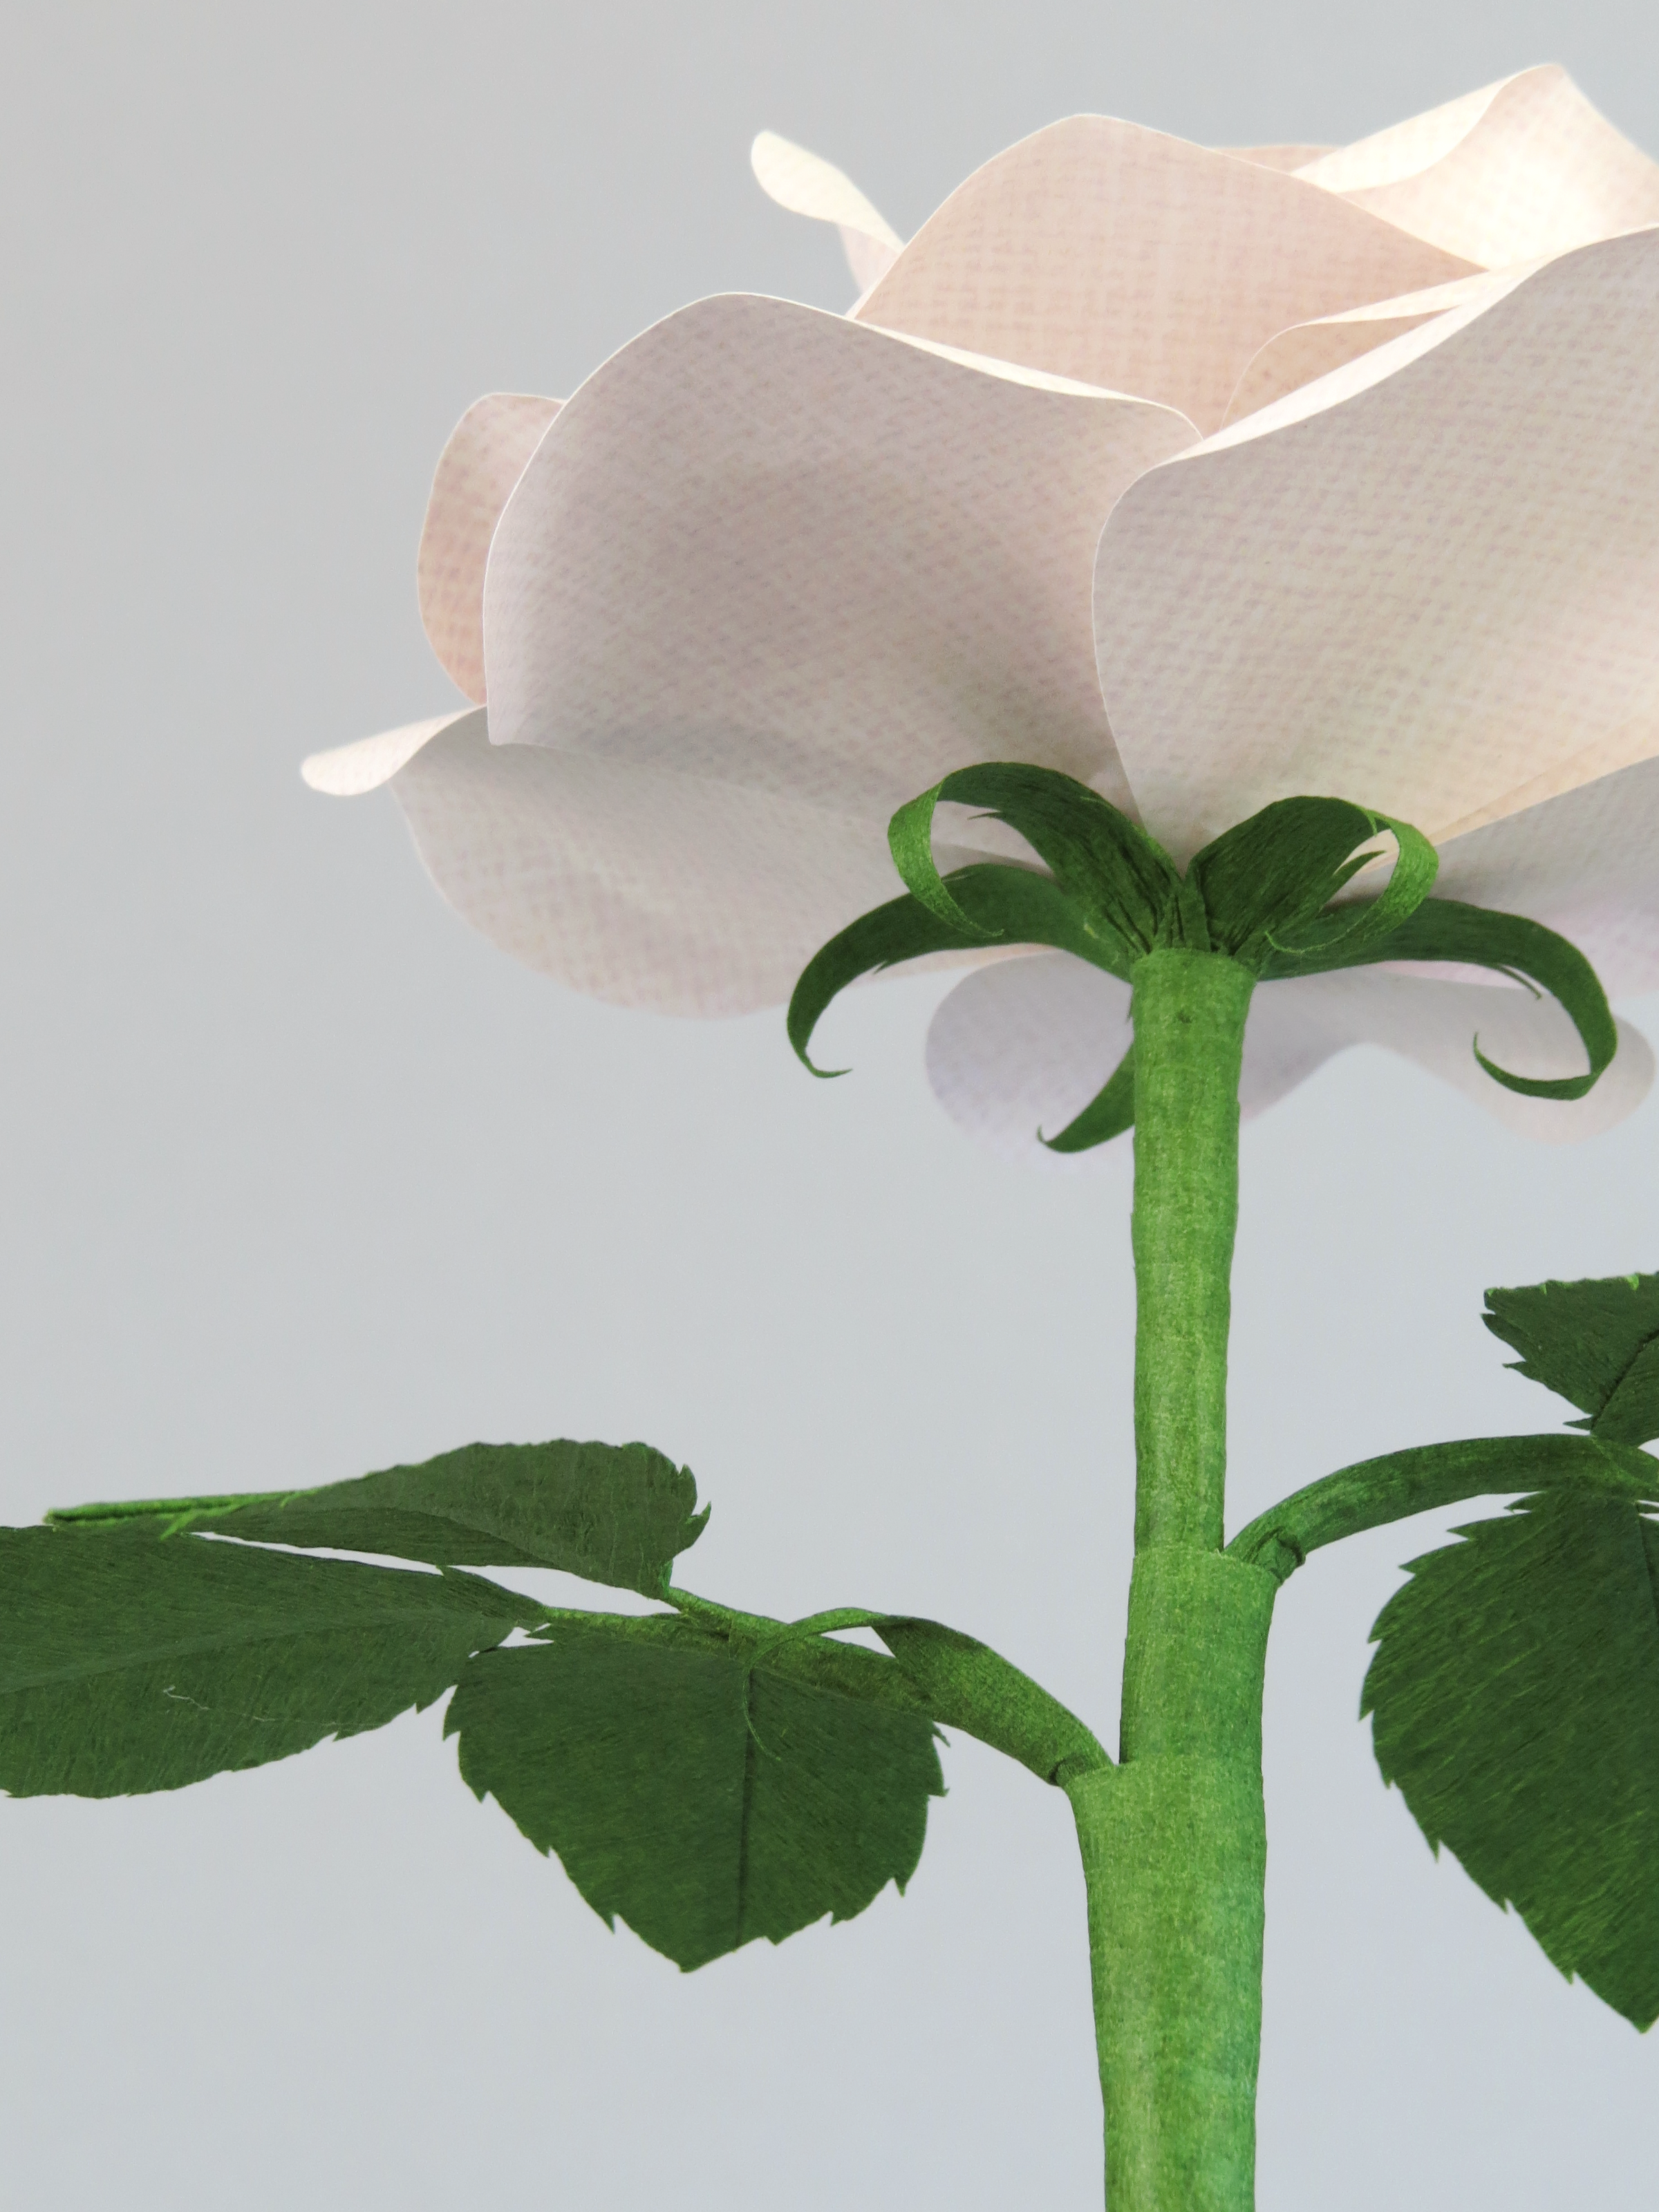 Detailed view of the back of a white linen grain rose with a green curled calyx underneath the white petals, and the green stem and leaves just in view